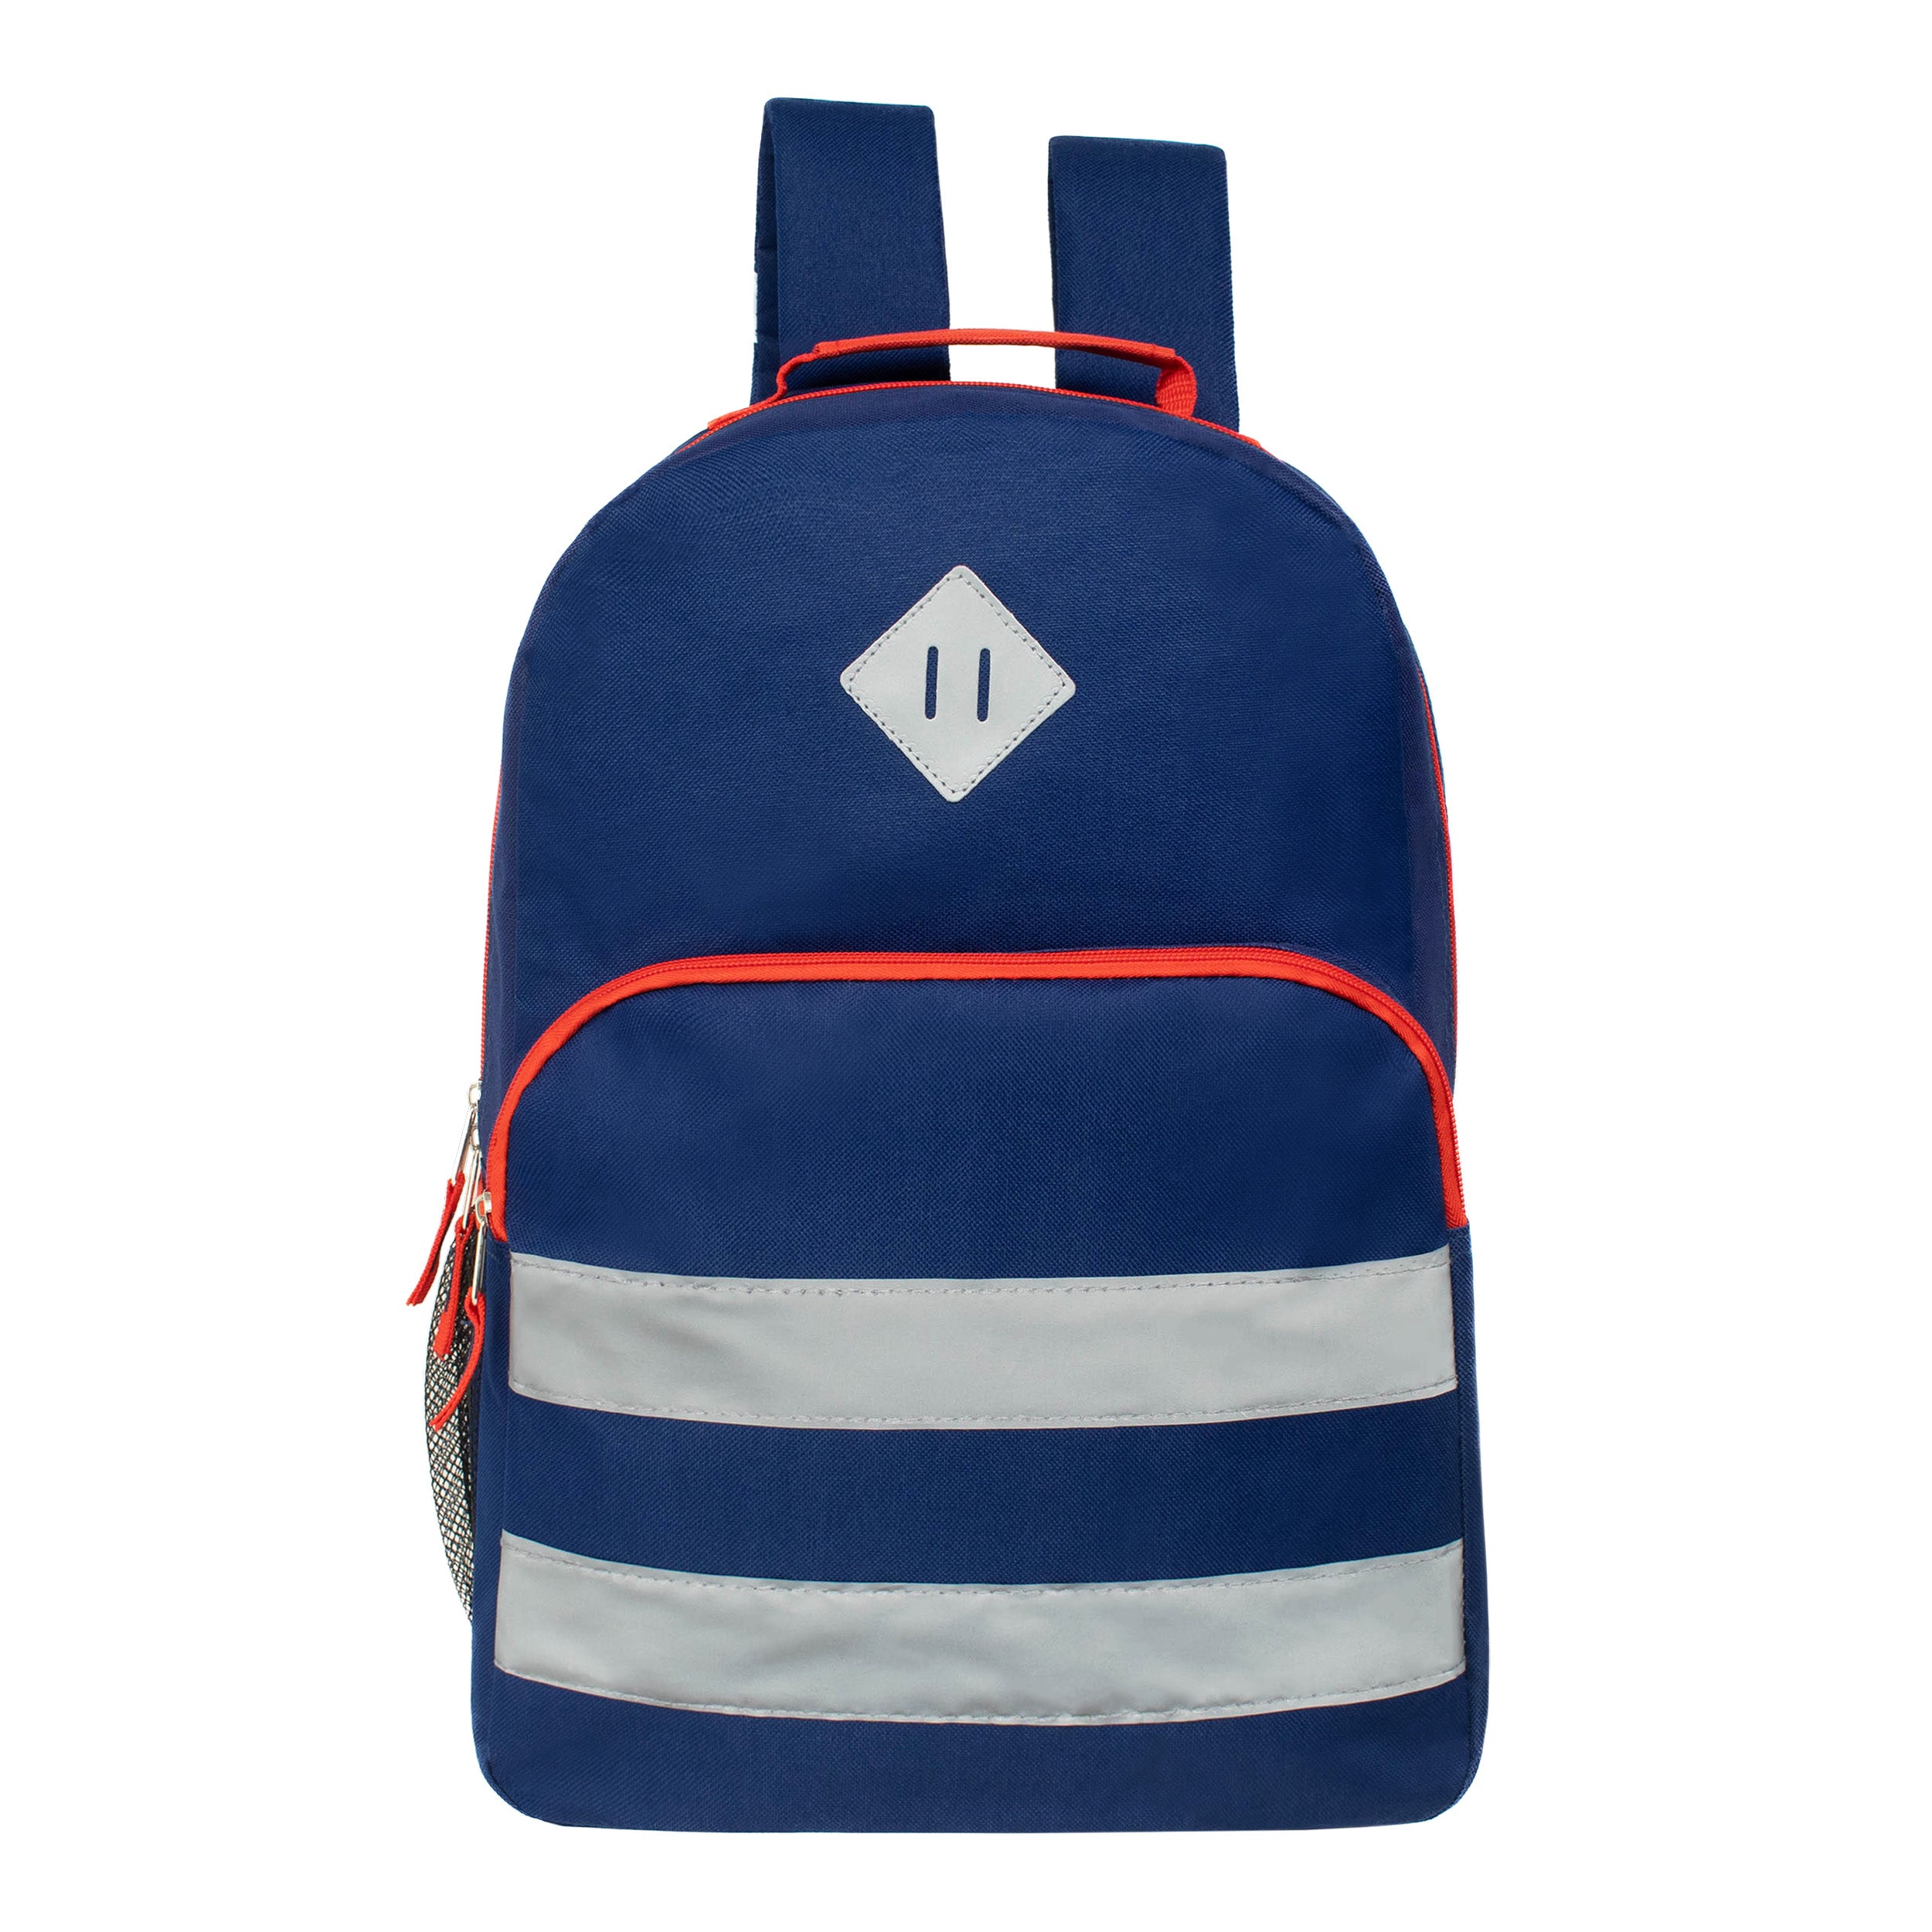 24 Wholesale 17 Inch Reflective Wholesale Backpack In 6 Colors - at 